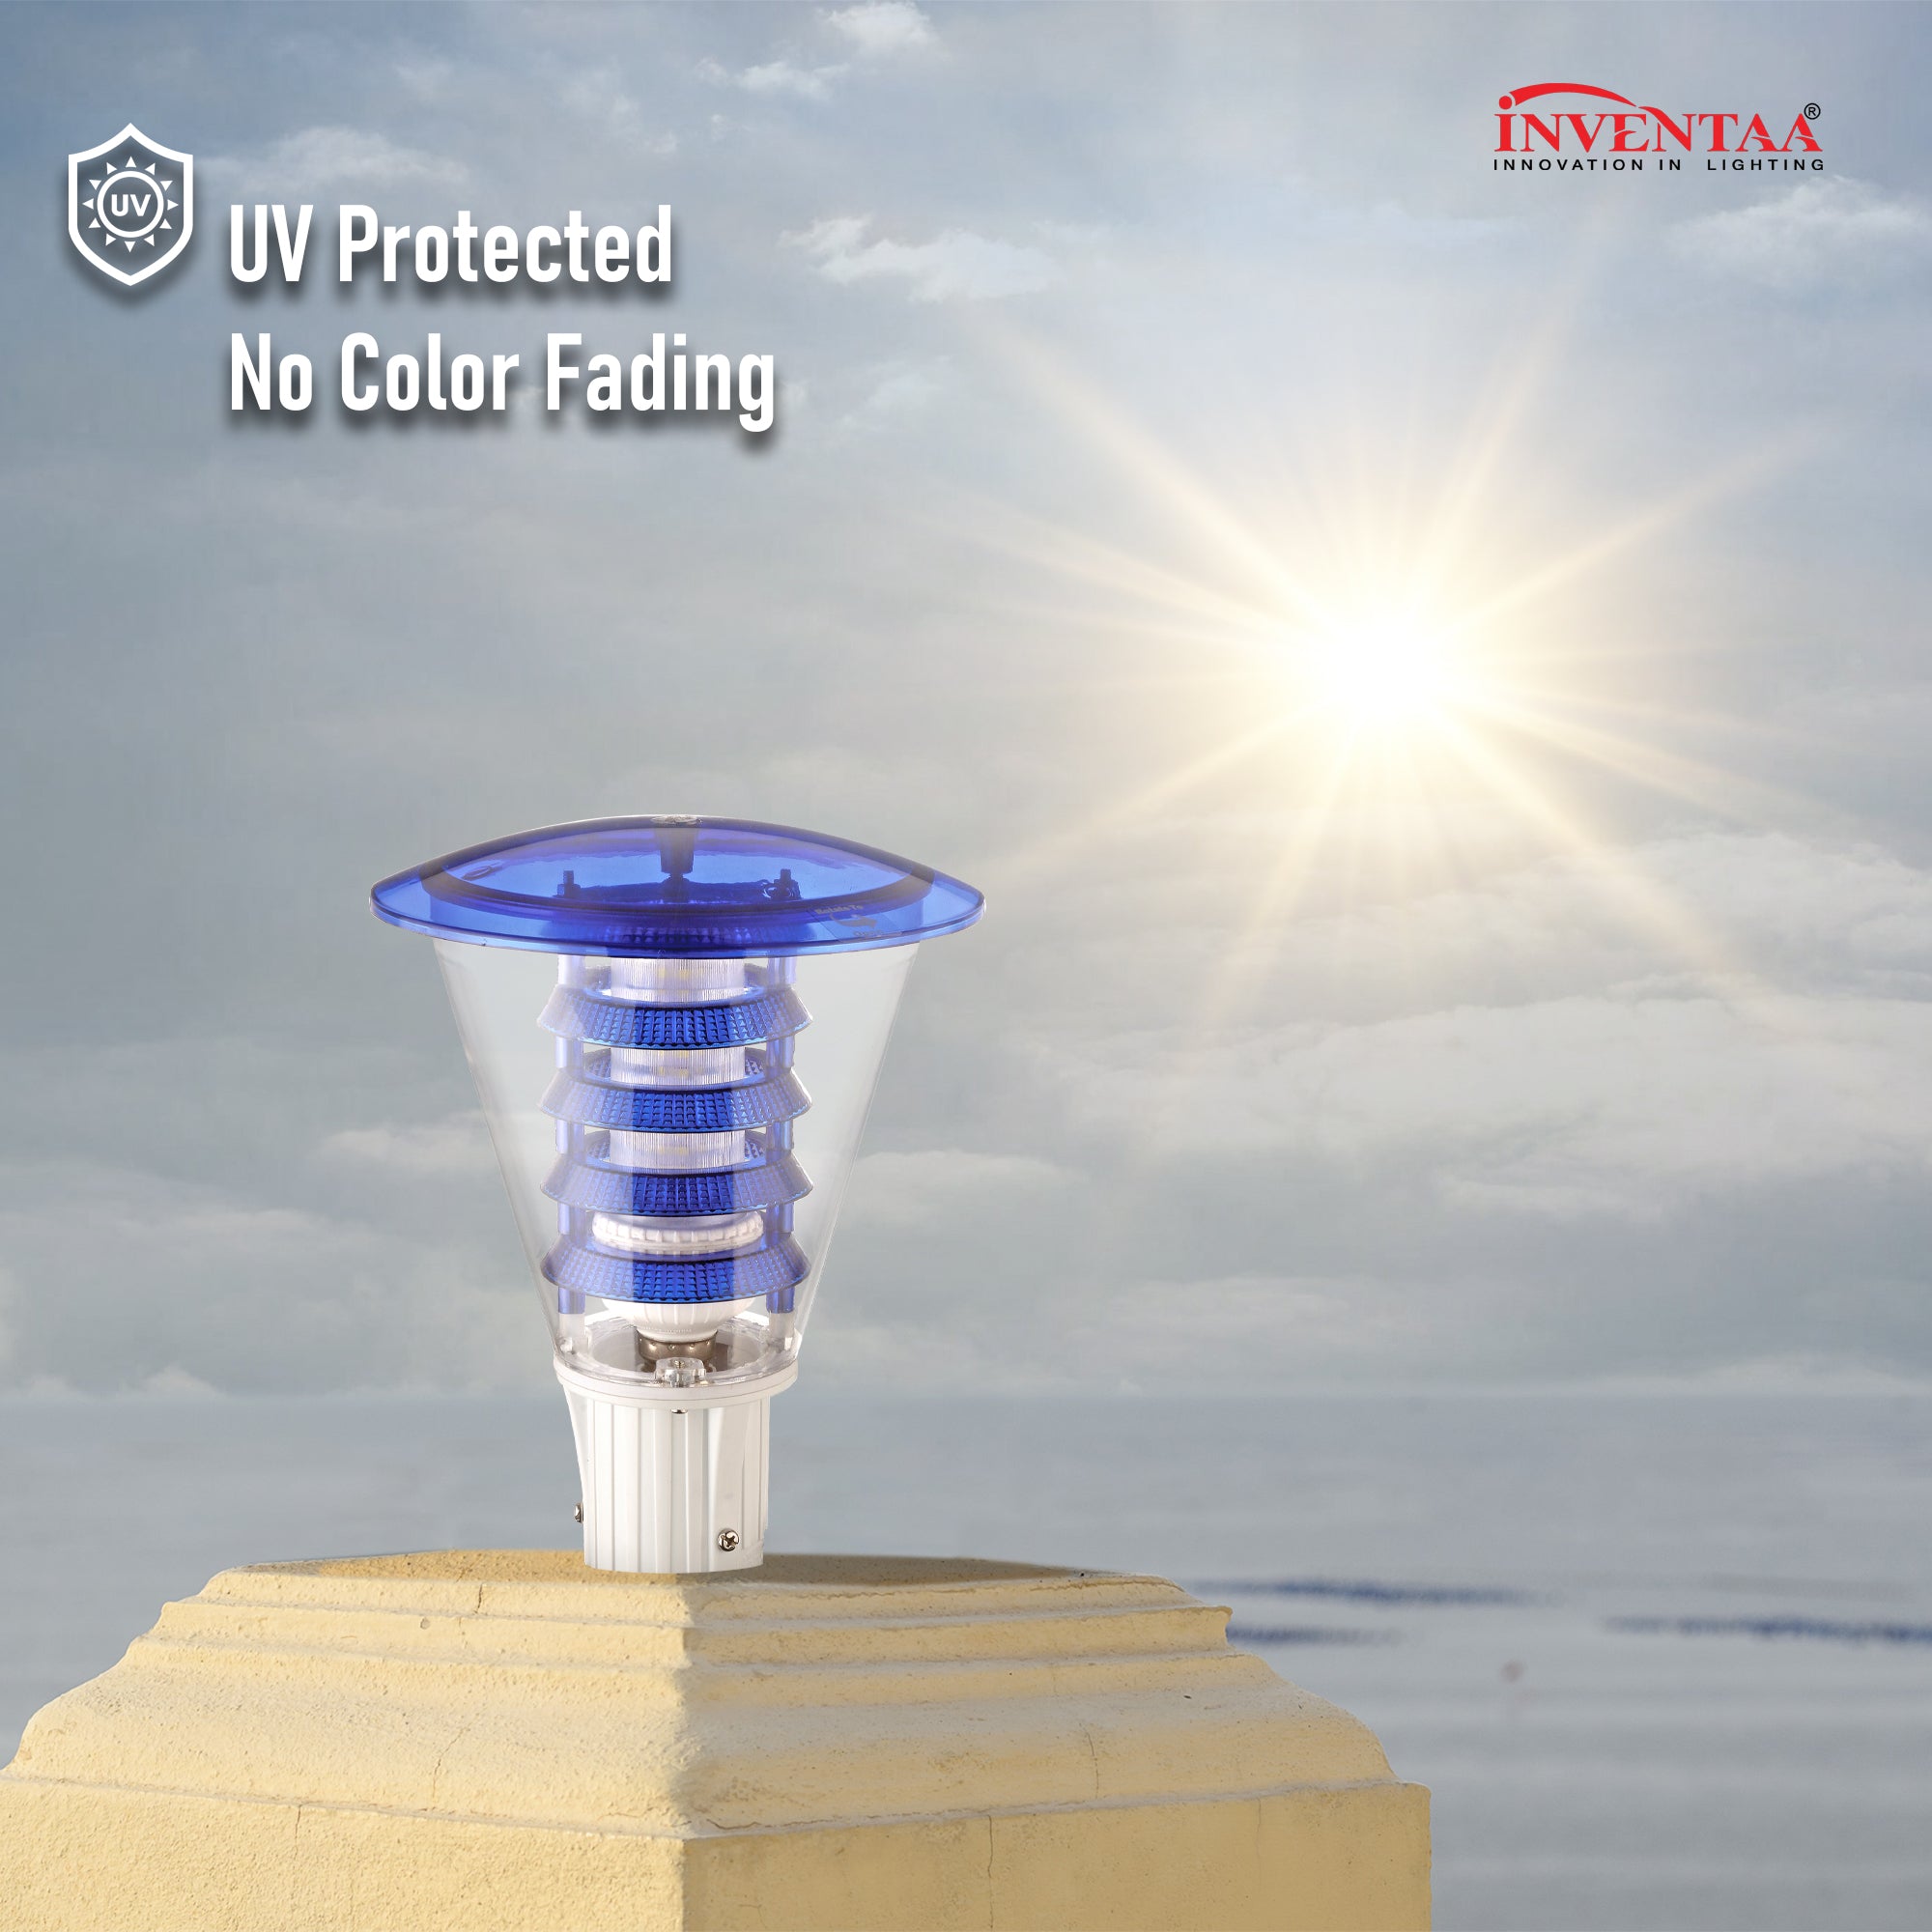 Mini olivia warm white led gate light with UV protection an no color fading #bulb options_warm